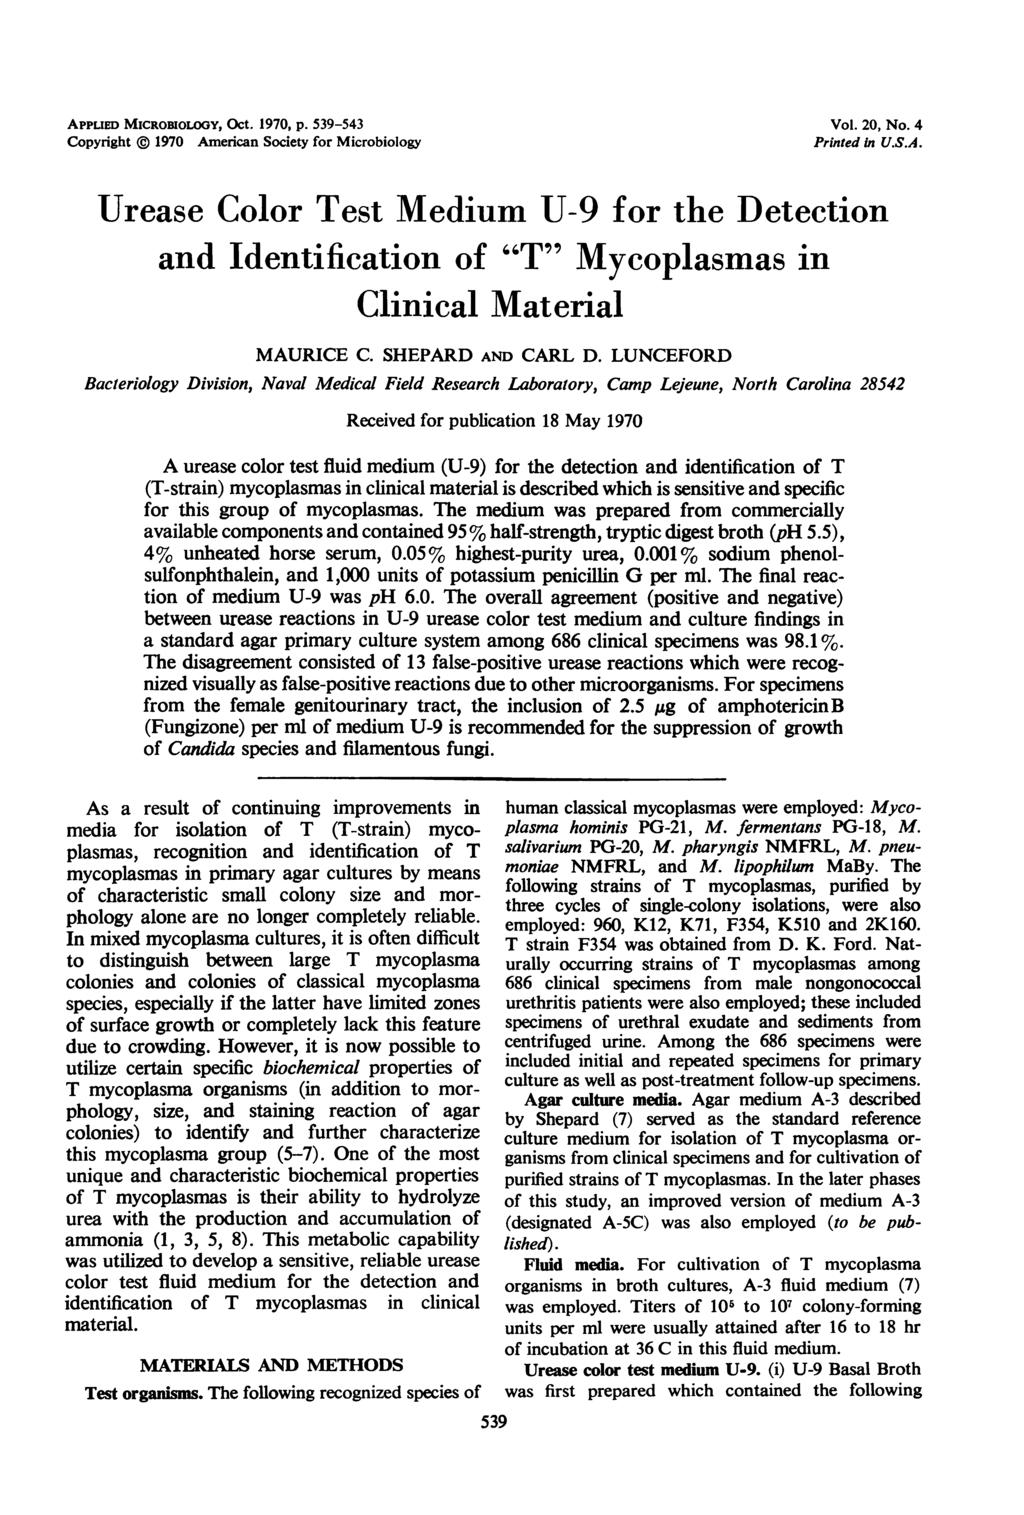 APPLIED MICROBIOLOGY, Oct. 1970, p. 539-543 Copyright 1970 American Society for Microbiology Vol. 20, No. 4 Printed In U.S.A. Urease Color Test Medium U-9 for the Detection and Identification of "T" Mycoplasmas in Clinical Material MAURICE C.